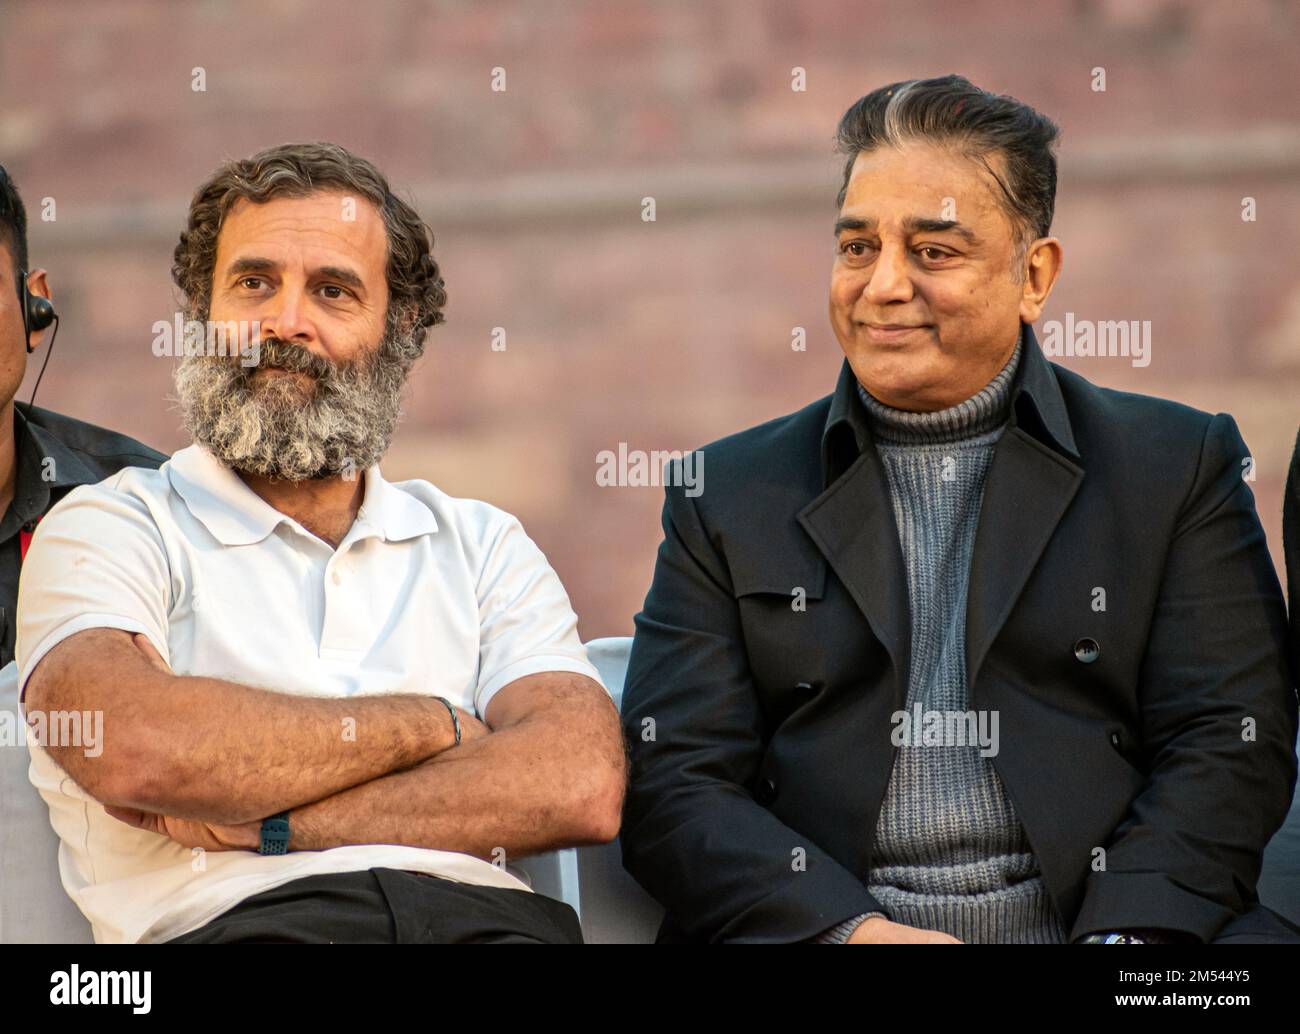 New Delhi, India. 24th Dec, 2022. India's main opposition, Indian National Congress party leader Rahul Gandhi along with Actor kamal Hassan at the Red Fort during the ongoing Bharat Jodo Yatra (Unite India March) in the old quarters of Delhi, India, December 24, 2022. (Photo by Mohsin Javed/Pacific Press) Credit: Pacific Press Media Production Corp./Alamy Live News Stock Photo